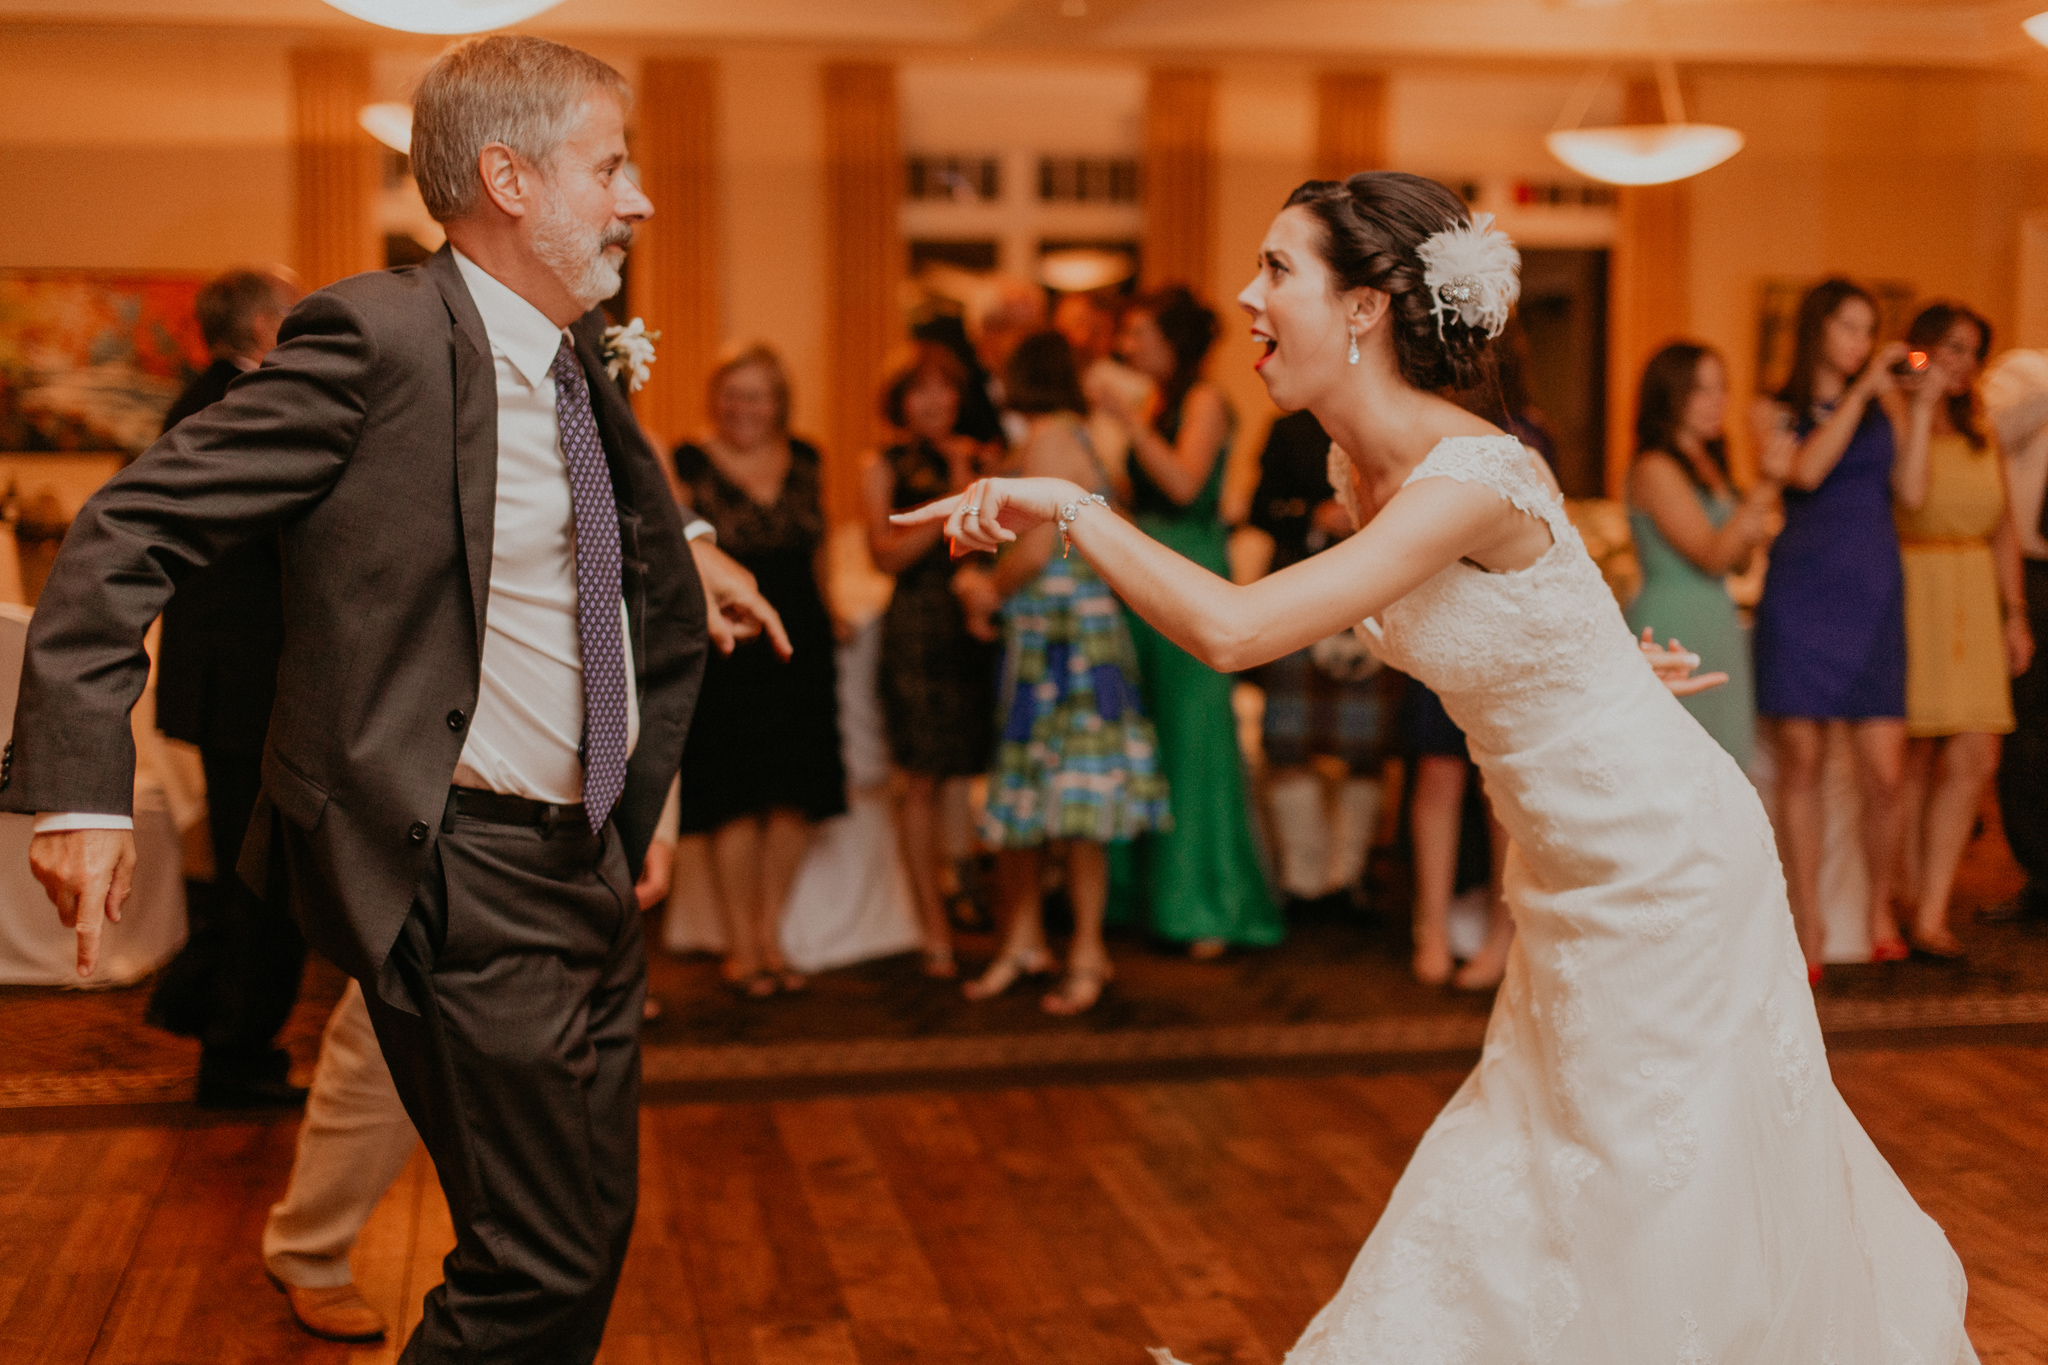 Bride smiles and has fun dancing with dad during wedding